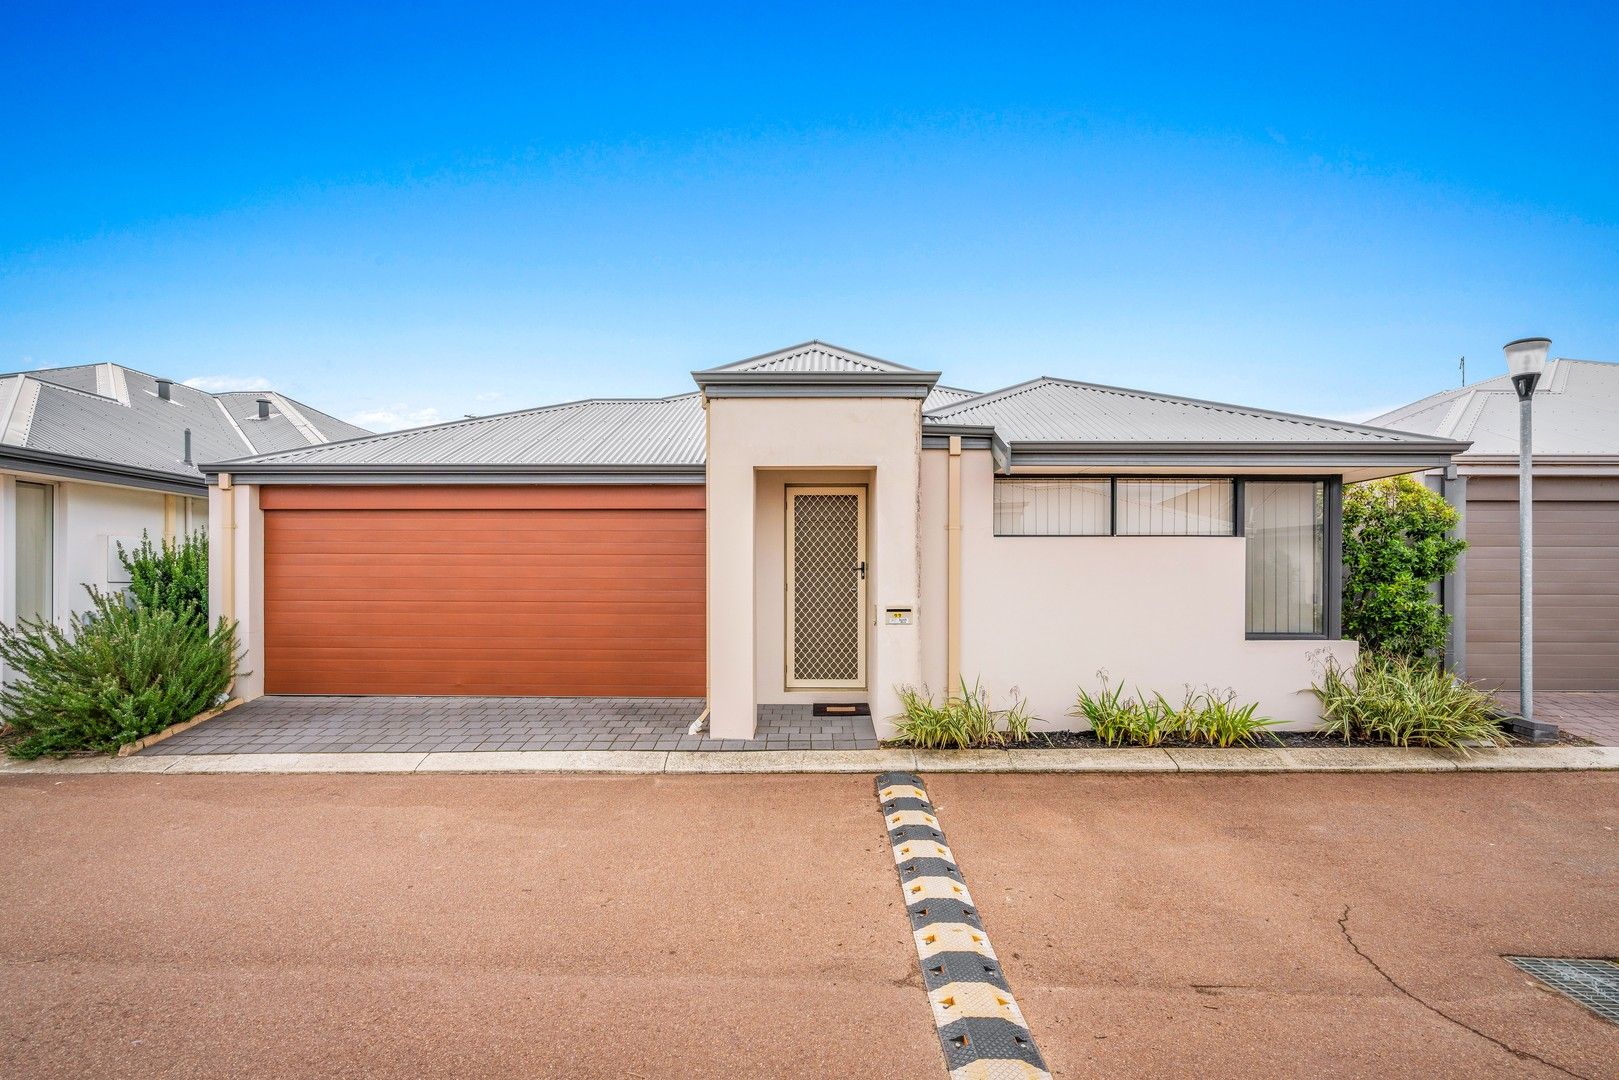 3 bedrooms House in 27/121 Eighth Road ARMADALE WA, 6112